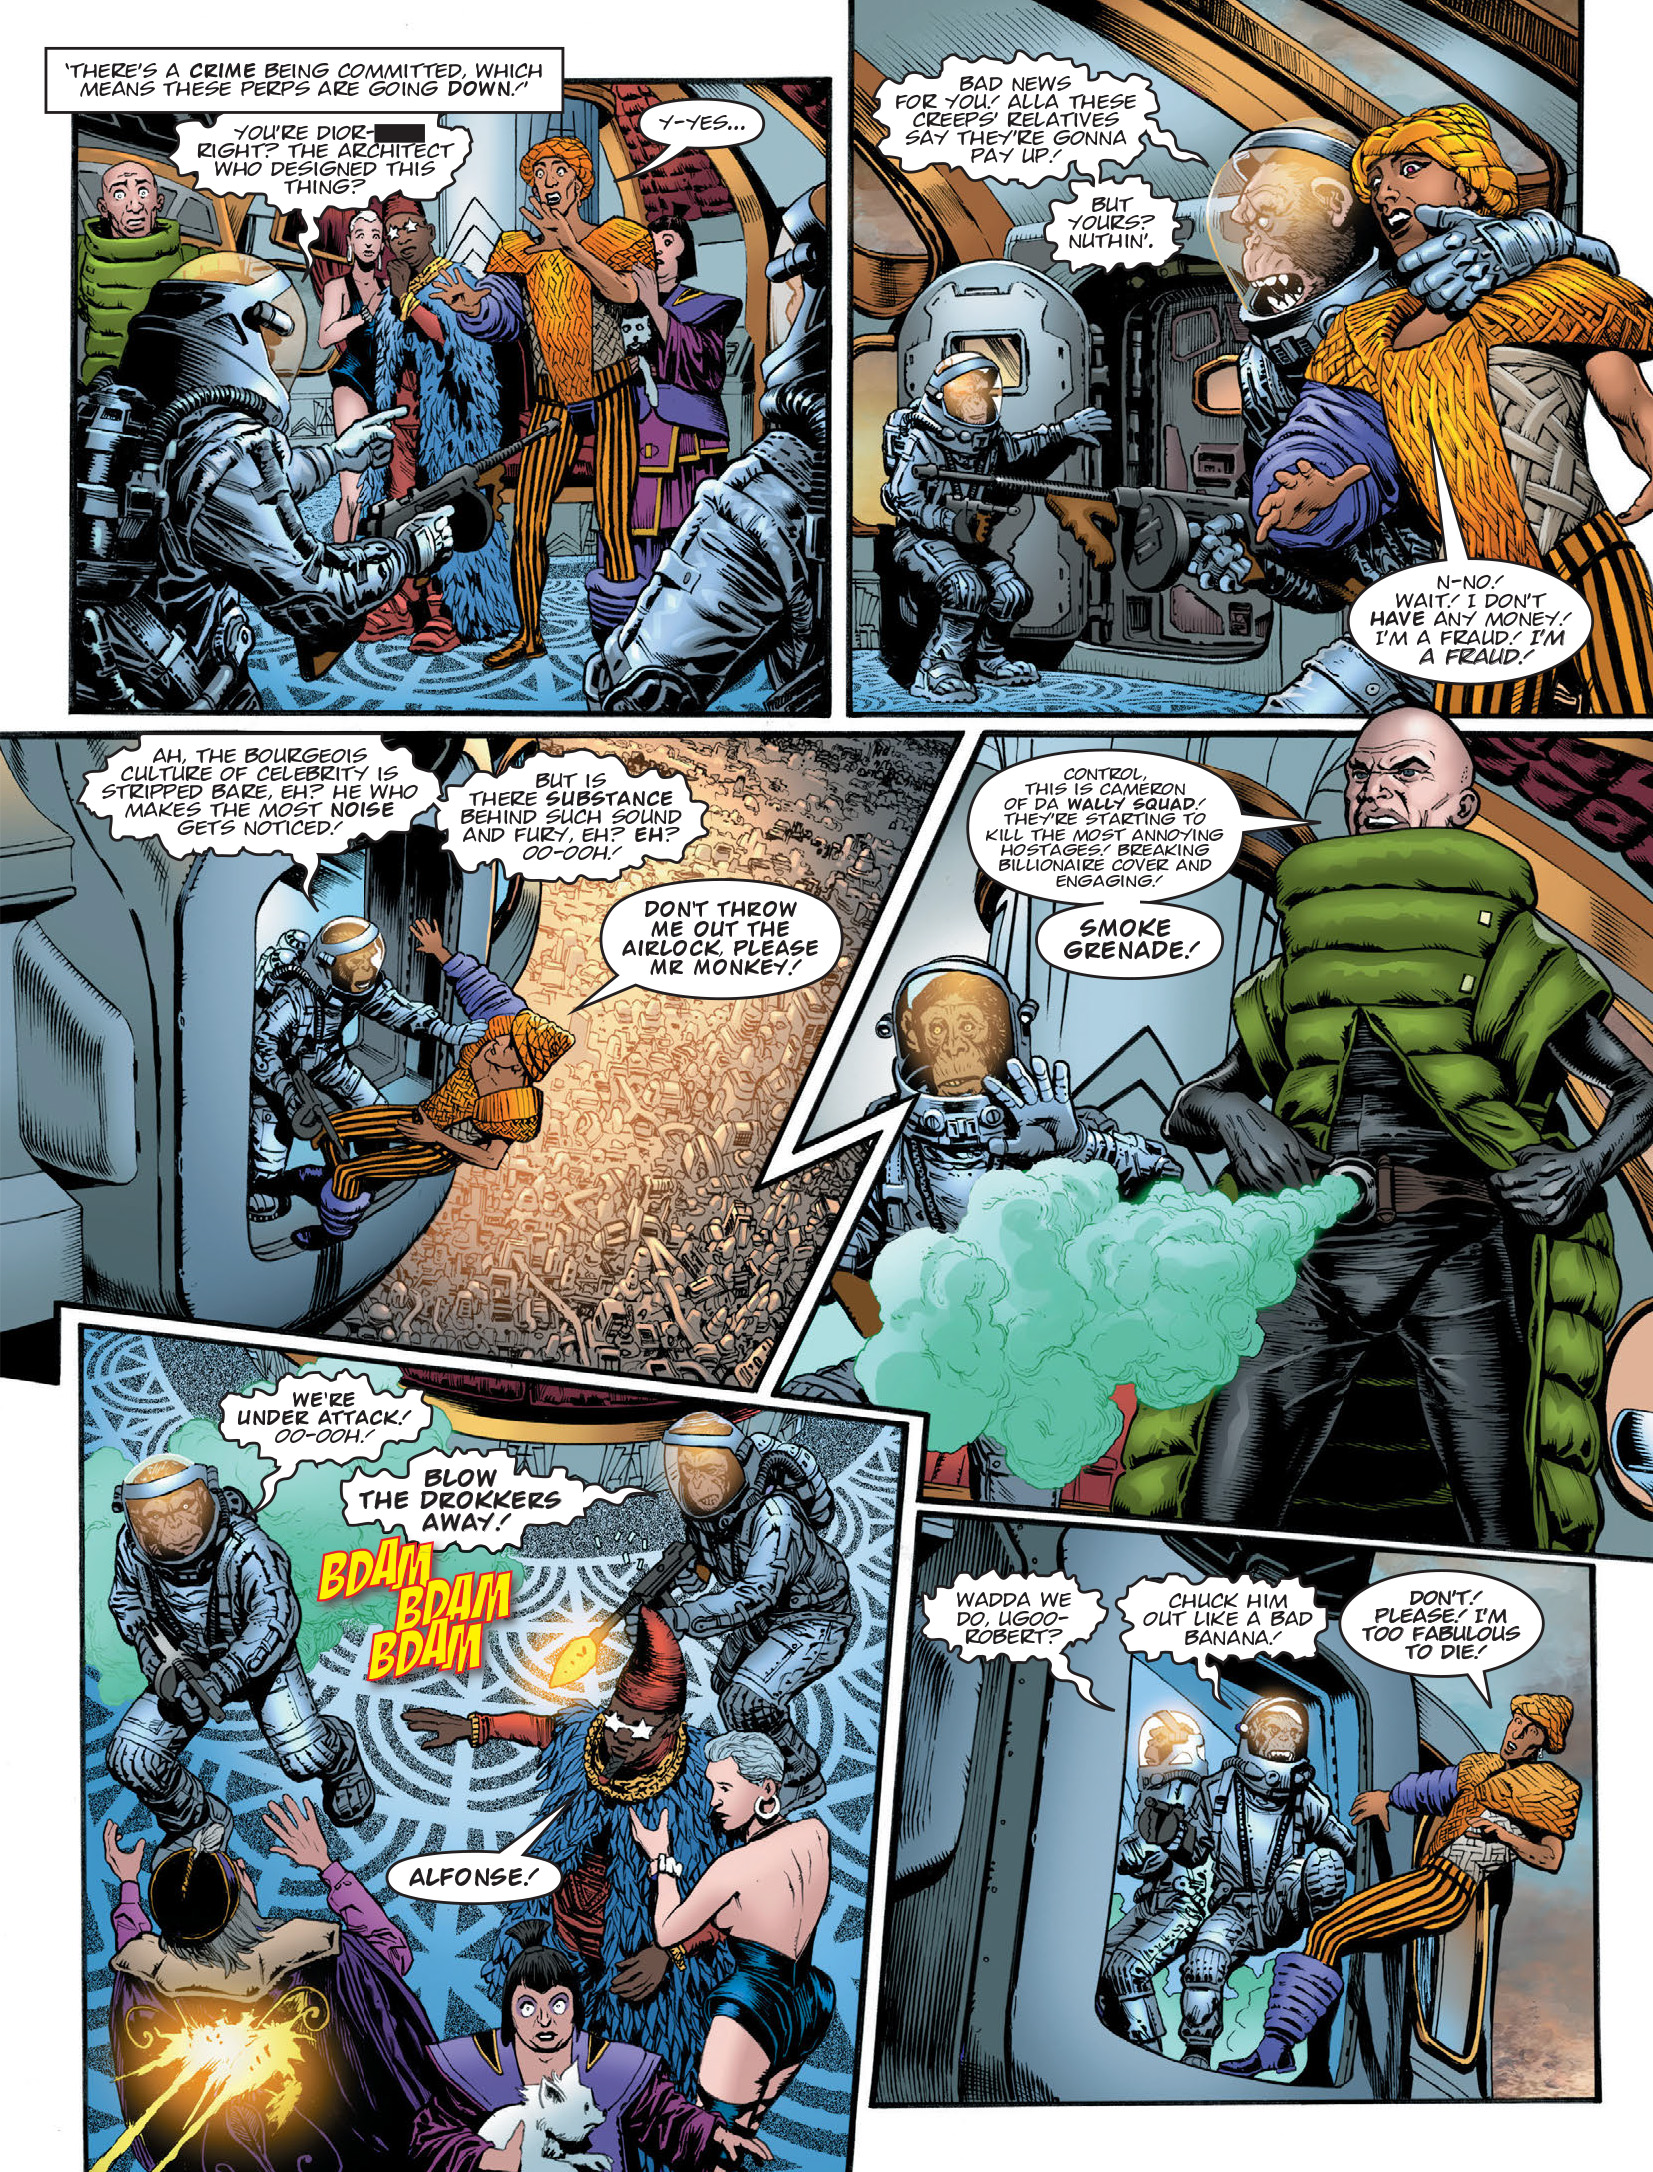 2000 AD: Chapter 2089 - Page 4